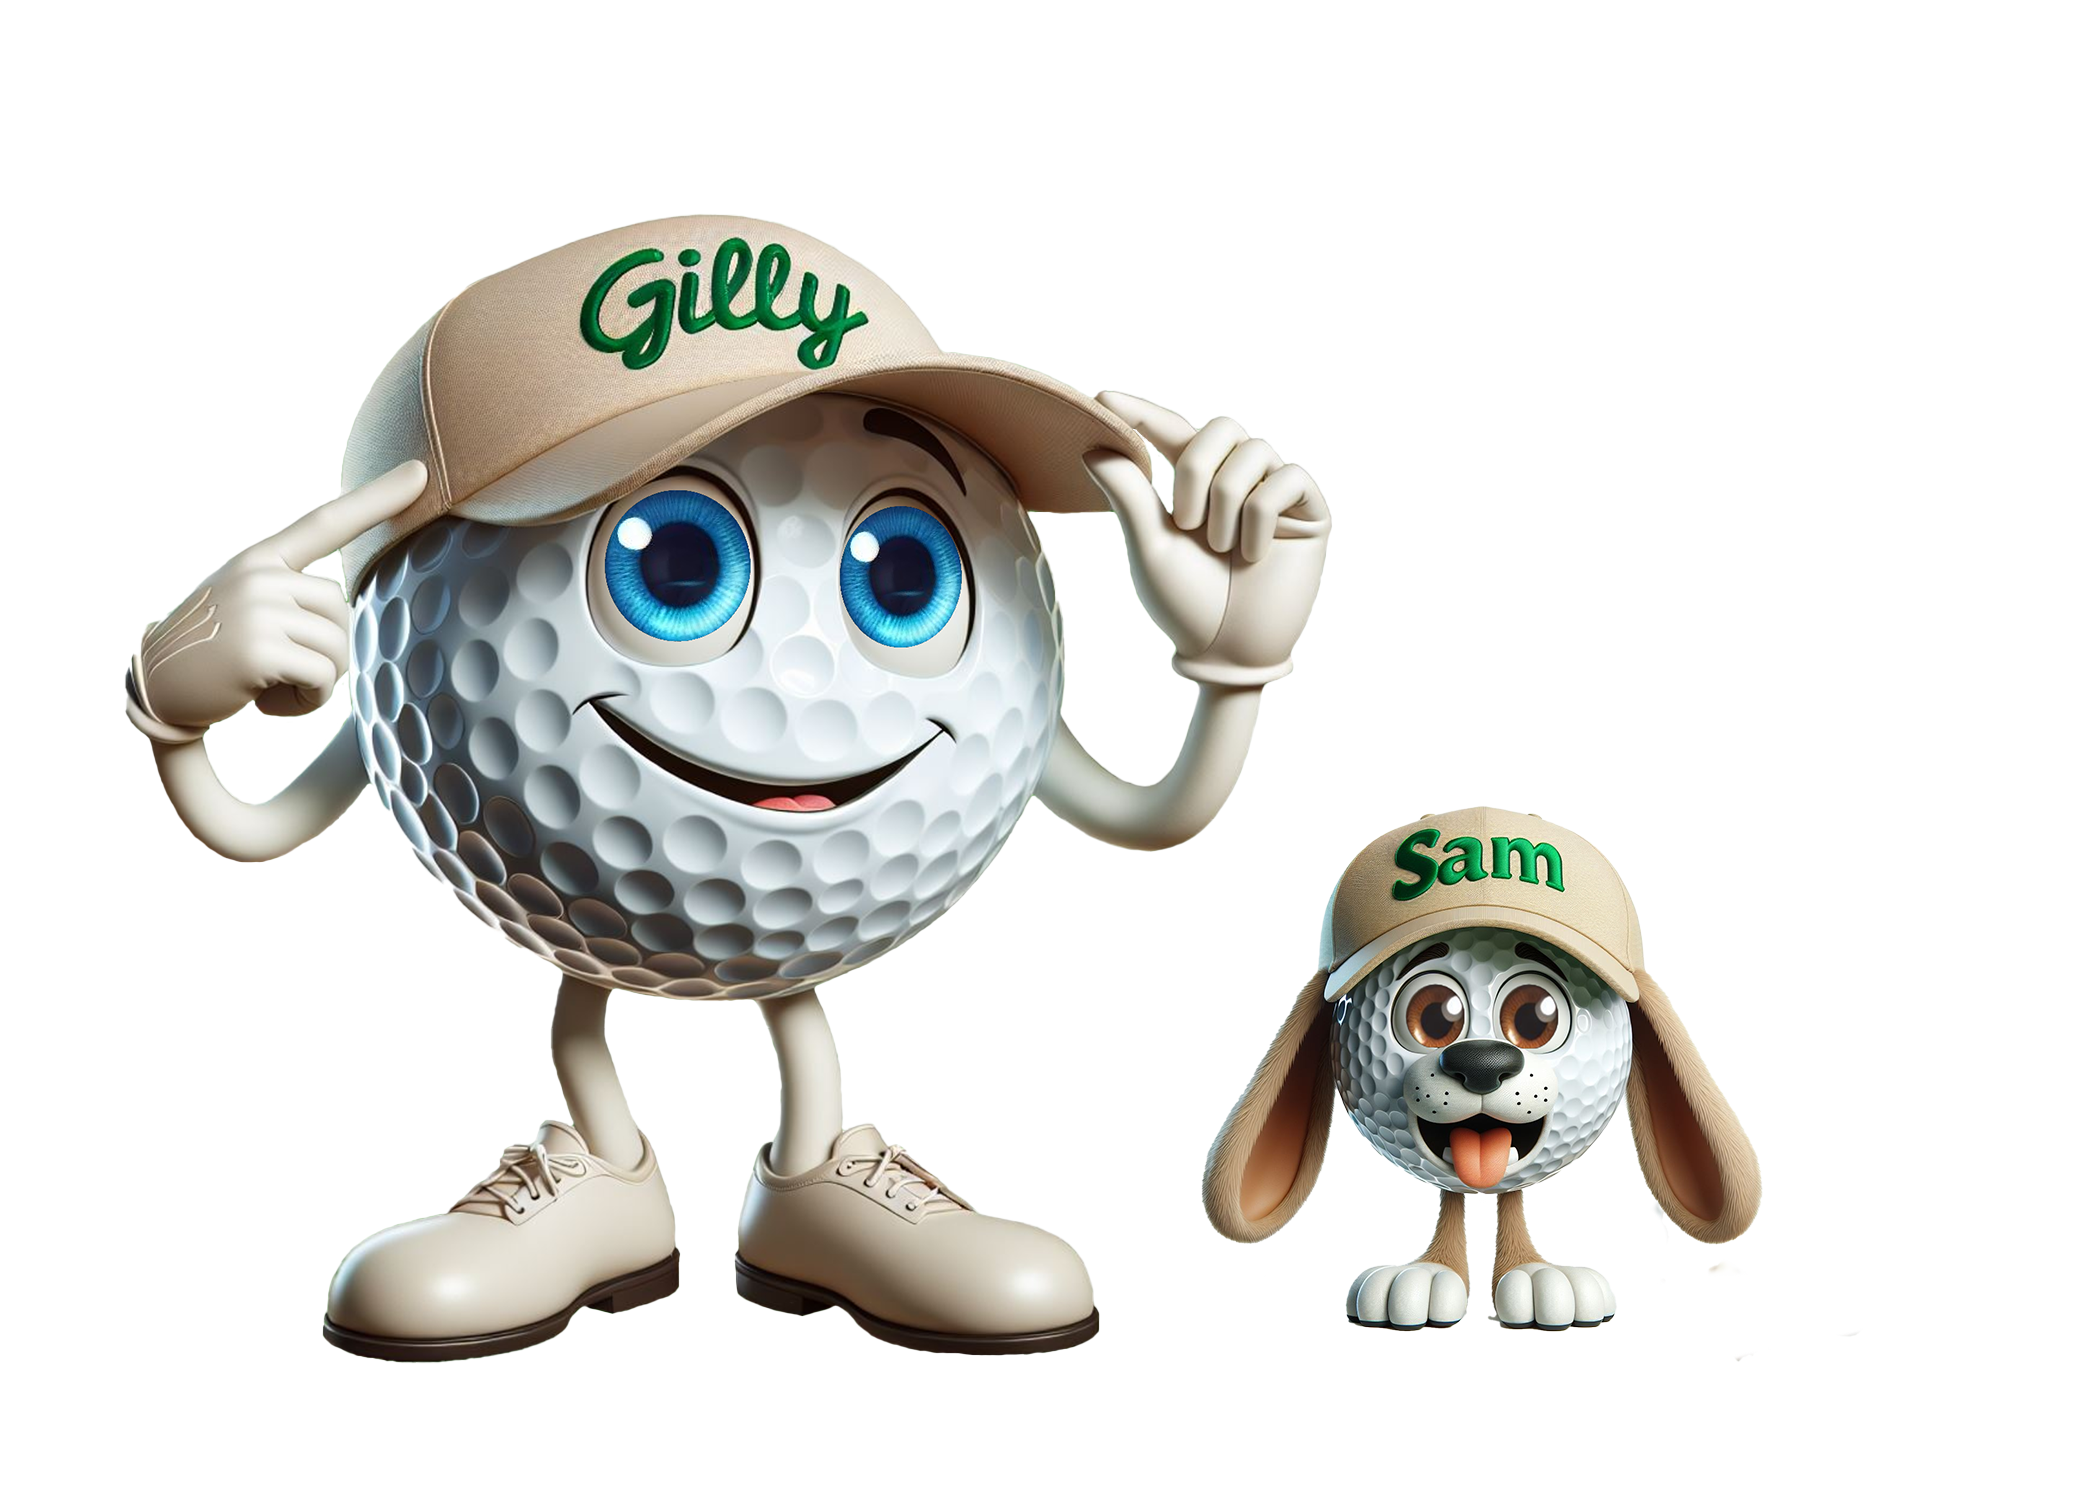 Gilly the Golf Ball